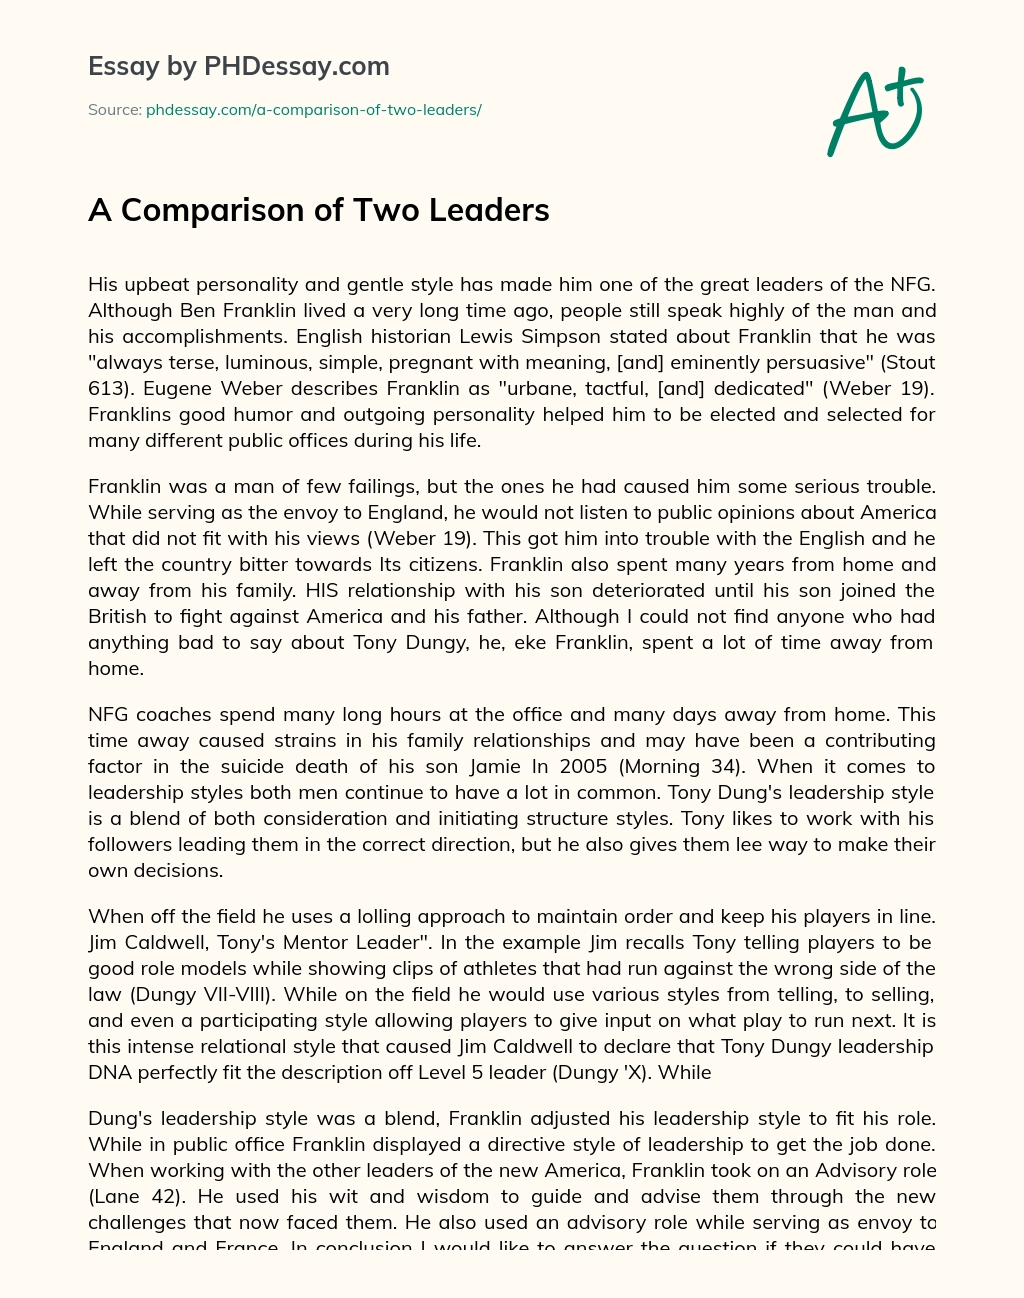 A Comparison of Two Leaders essay